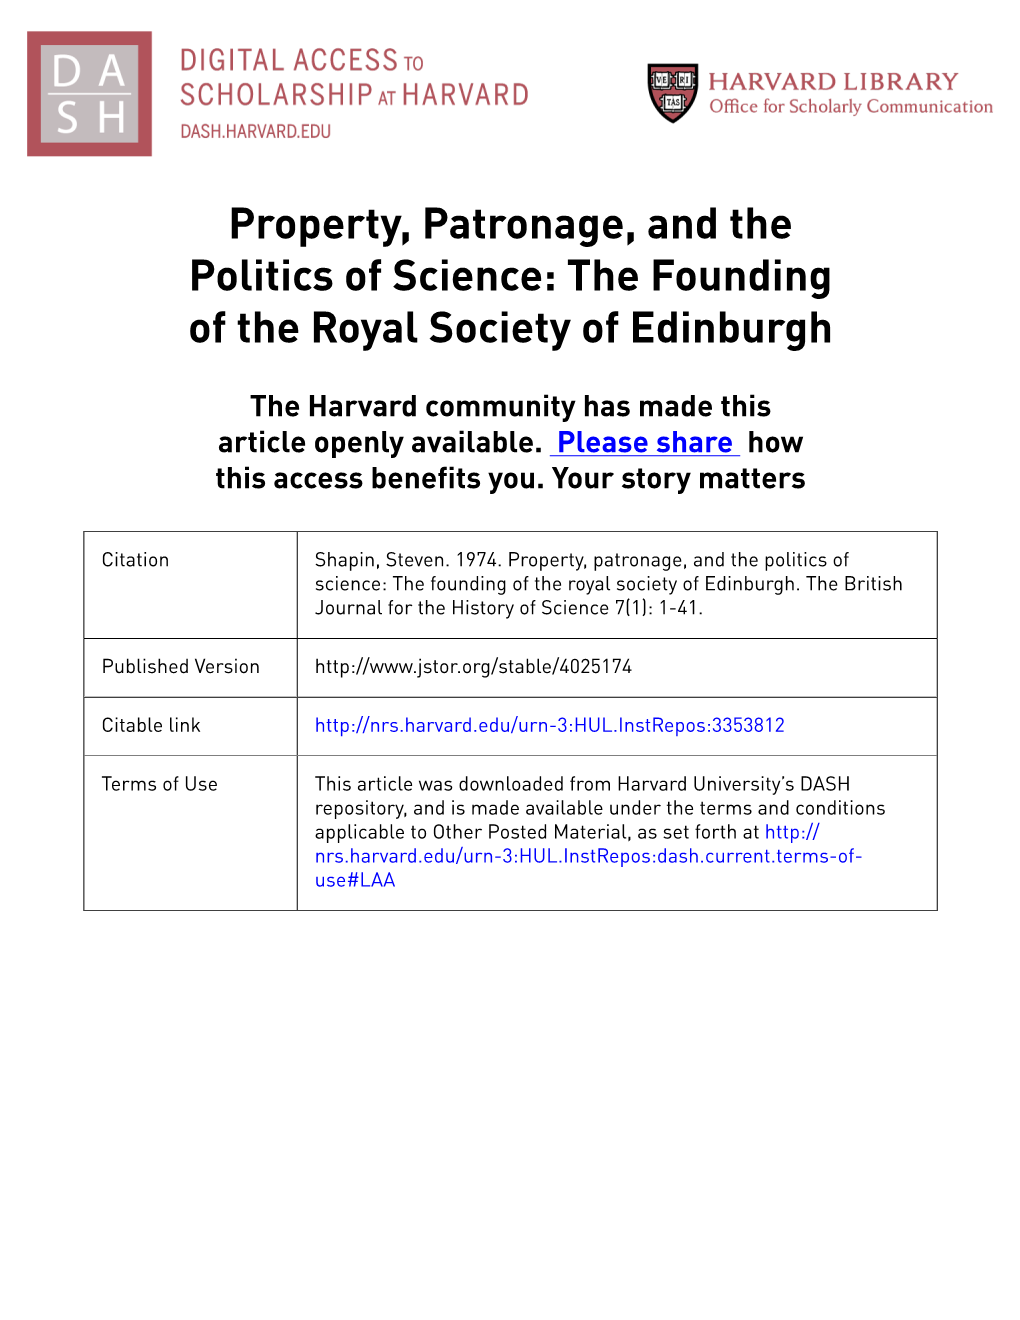 Property, Patronage, and the Politics of Science: the Founding of the Royal Society of Edinburgh